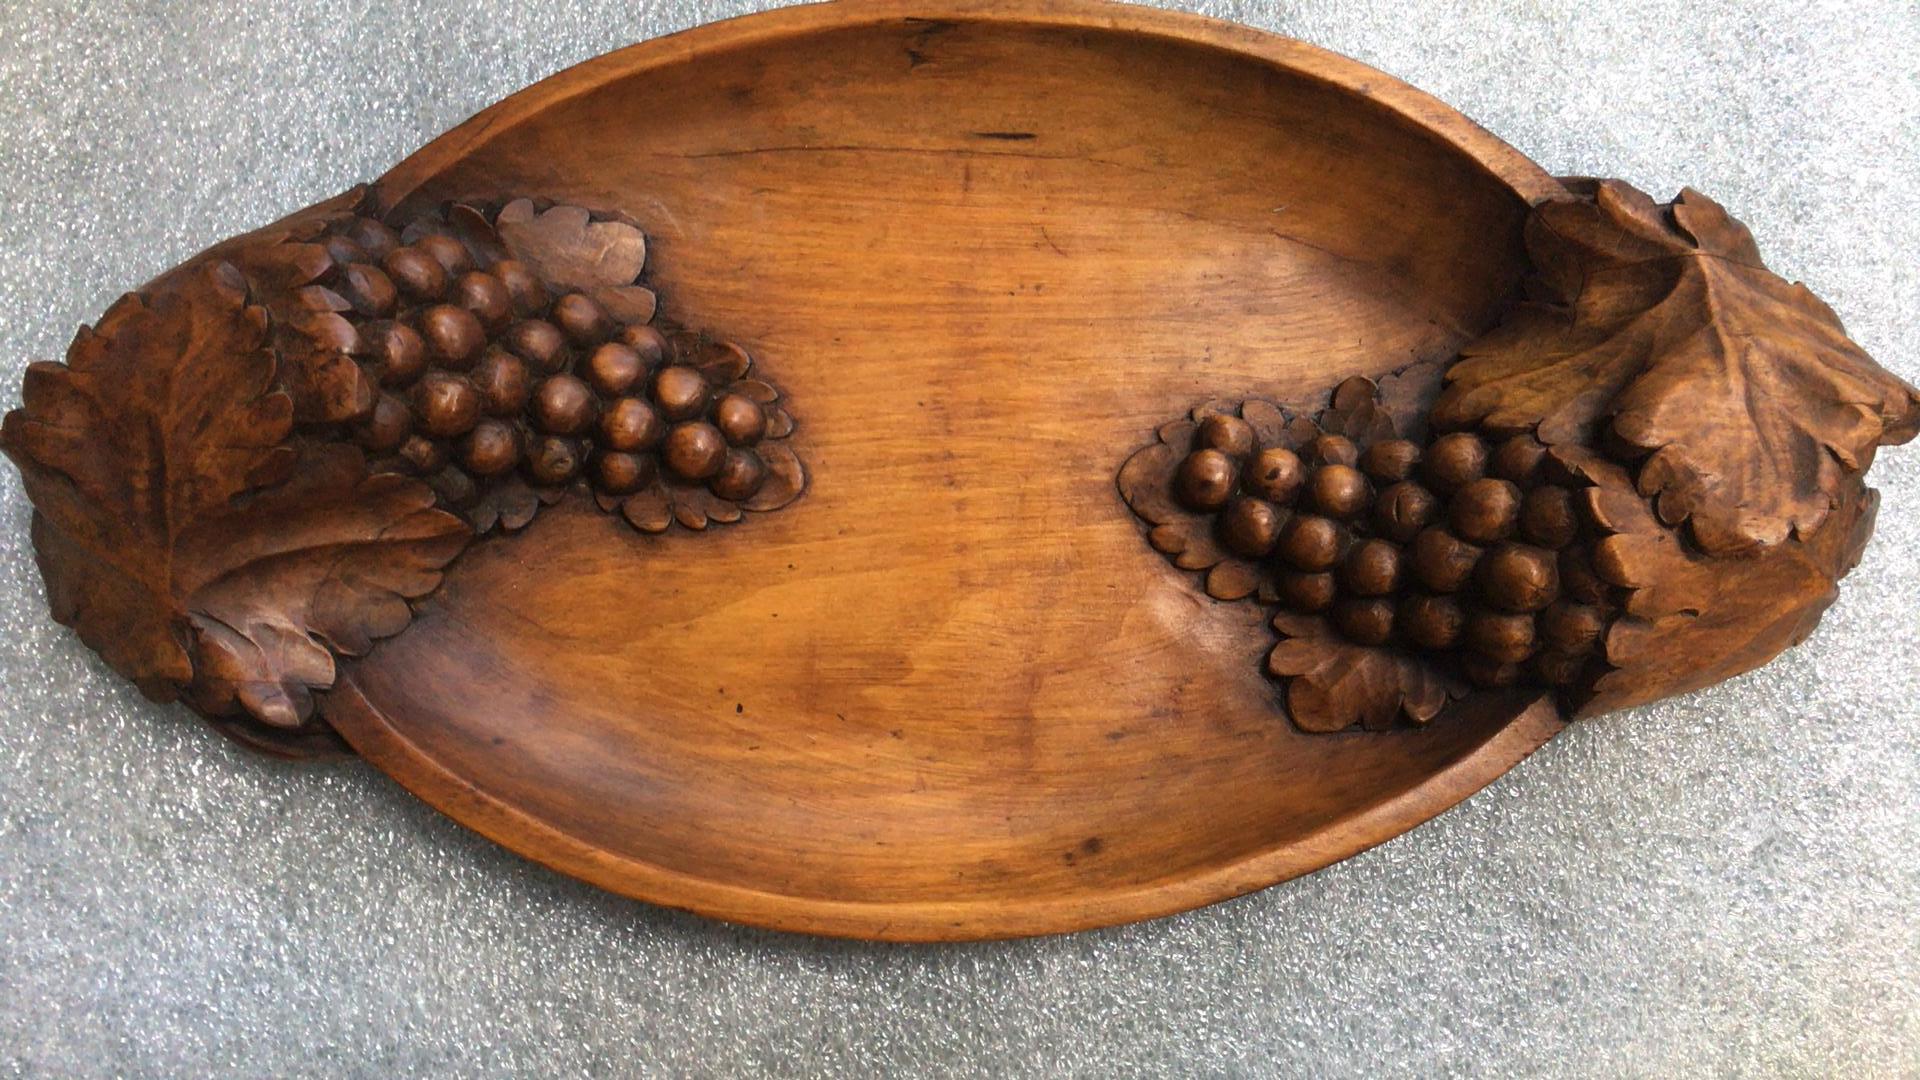 Early 20th Century French Carved Wood Platter with Grapes and Vine Leaves, circa 1900